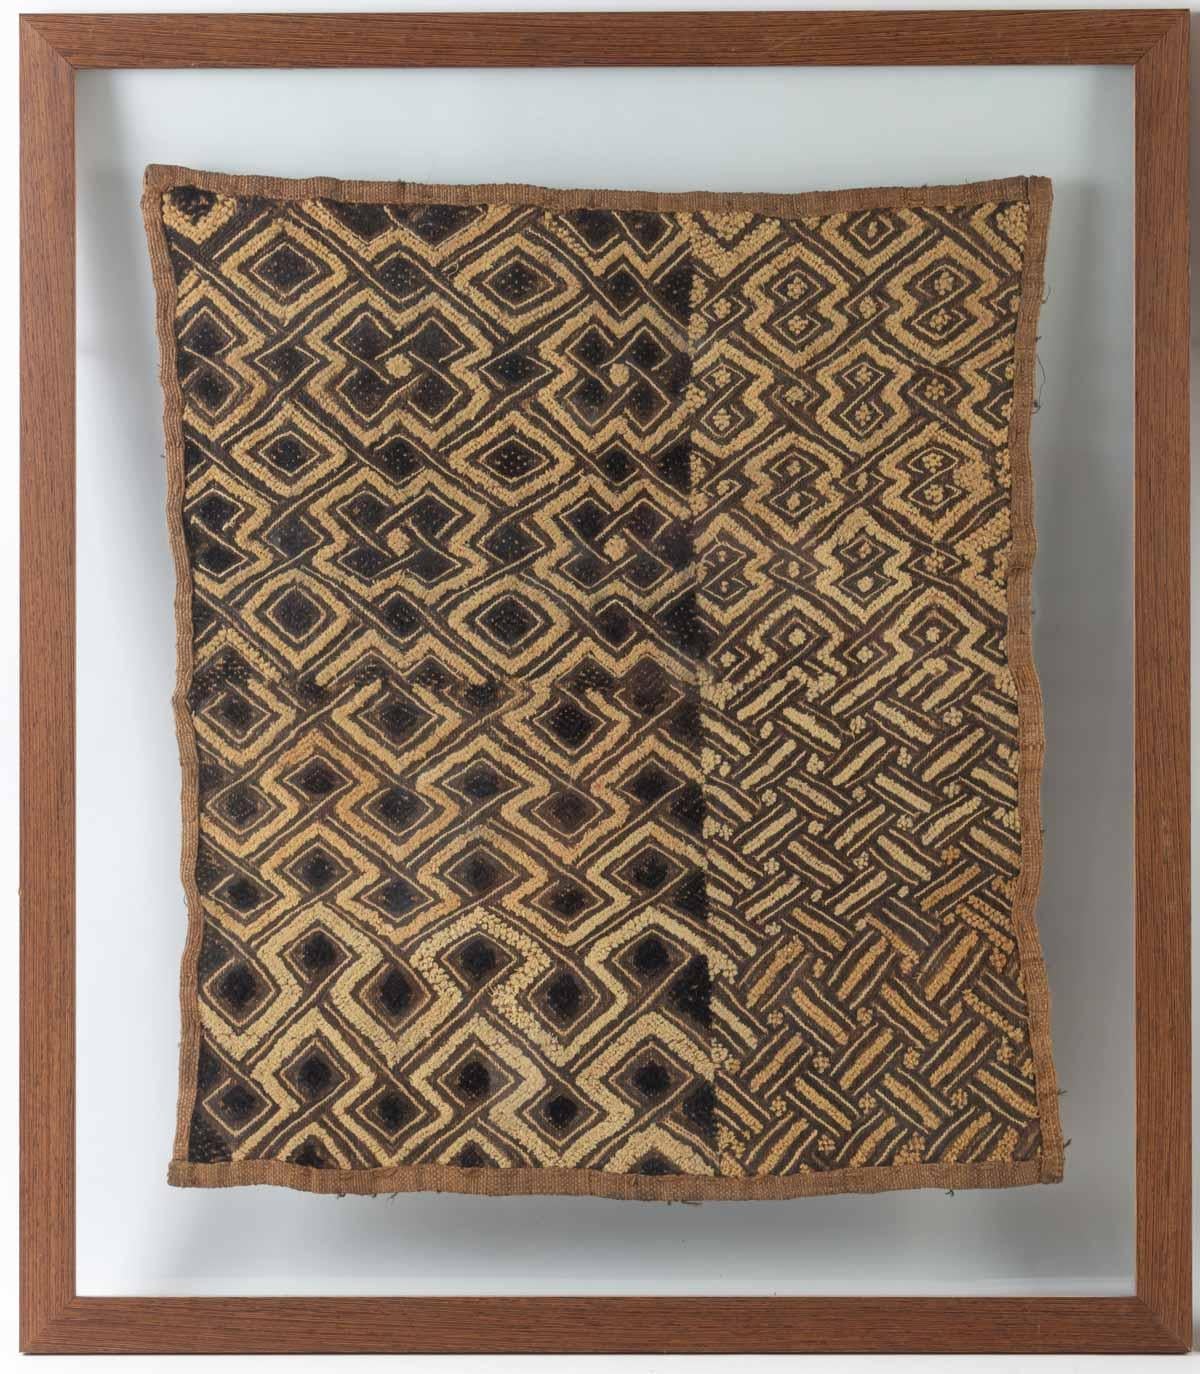 Pair of framed African fabrics, early 20th century.

Measures: H: 55 cm and 72 cm with frame. W: 45 cm and 63 cm with frame. D: 1,5 cm.